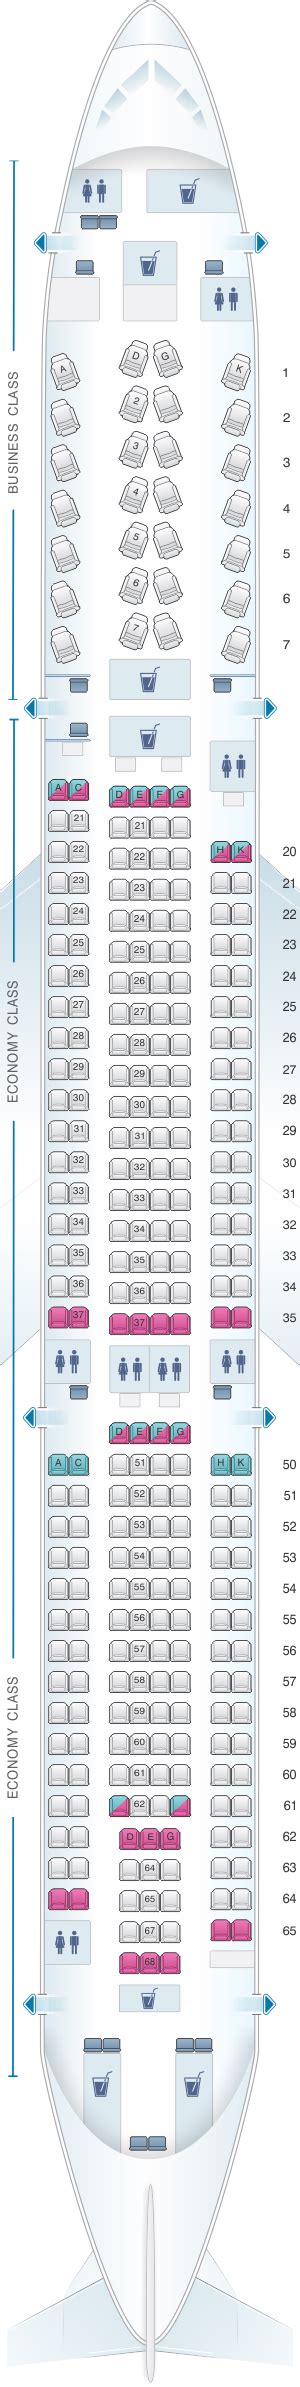 Seat Map Srilankan Airlines Airbus A330 300 Config 1 Air Transat